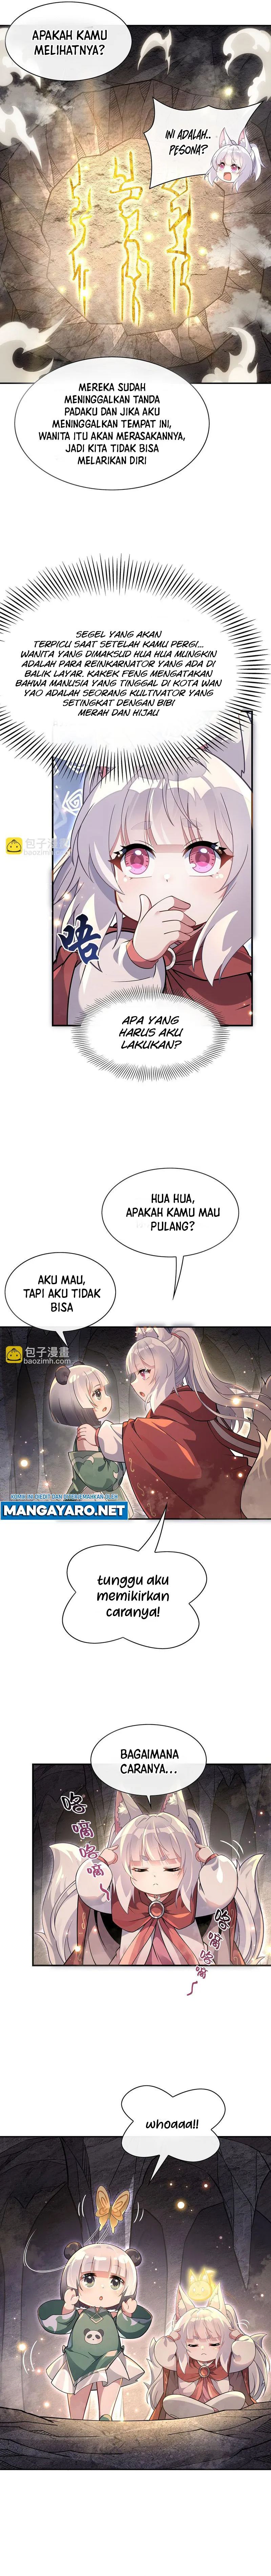 Dilarang COPAS - situs resmi www.mangacanblog.com - Komik my female apprentices are all big shots from the future 215 - chapter 215 216 Indonesia my female apprentices are all big shots from the future 215 - chapter 215 Terbaru 6|Baca Manga Komik Indonesia|Mangacan